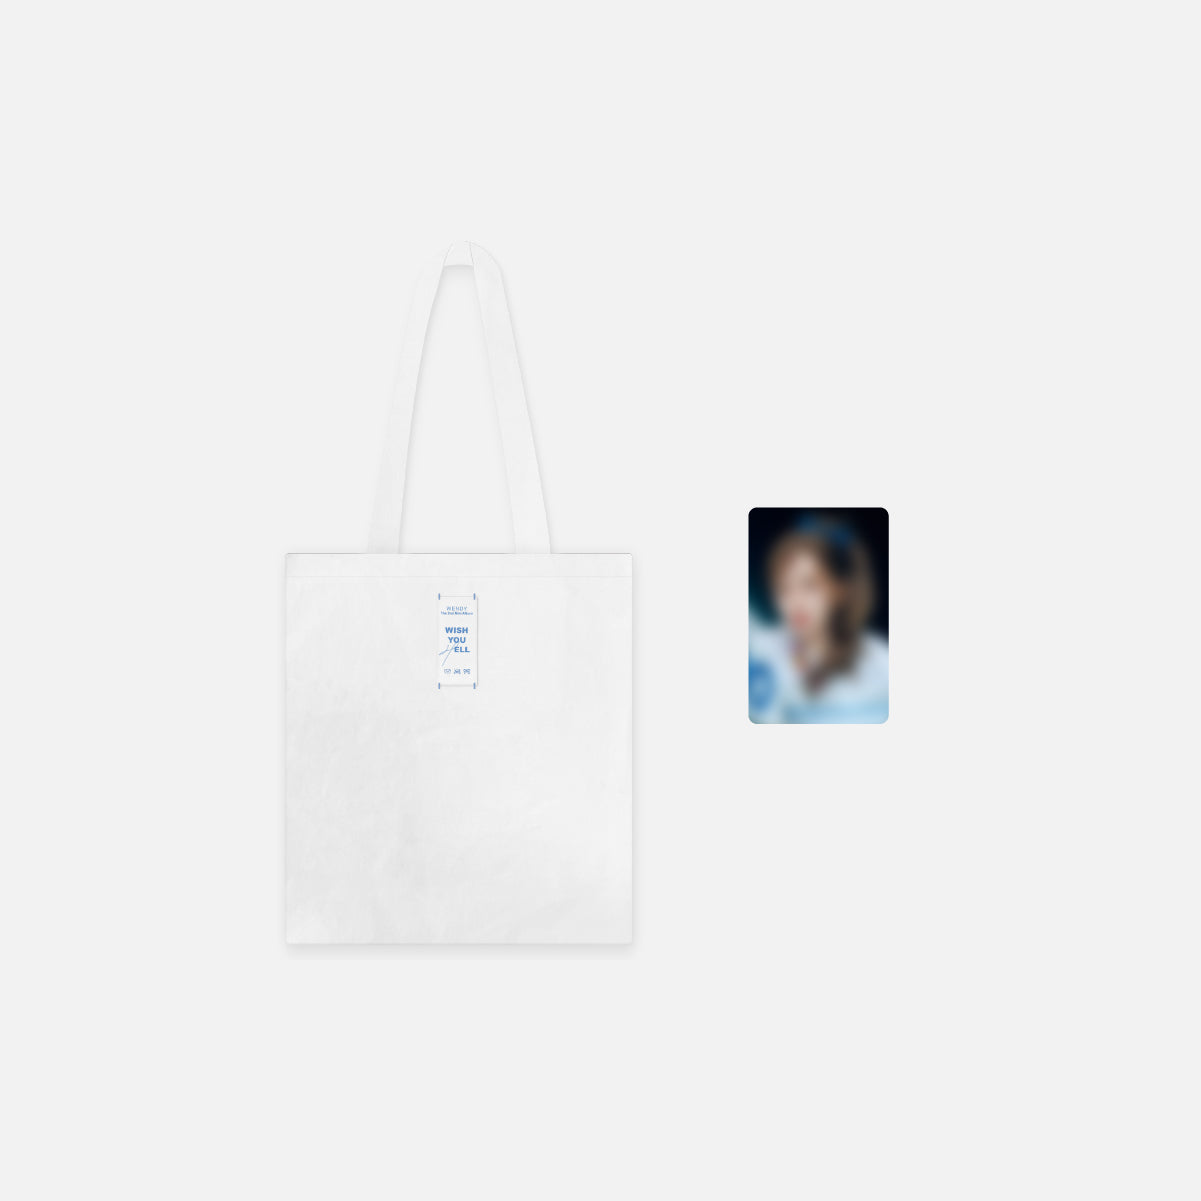 RED VELVET WENDY - WISH YOU HELL 2ND MINI ALBUM OFFICIAL MD ECO BAG